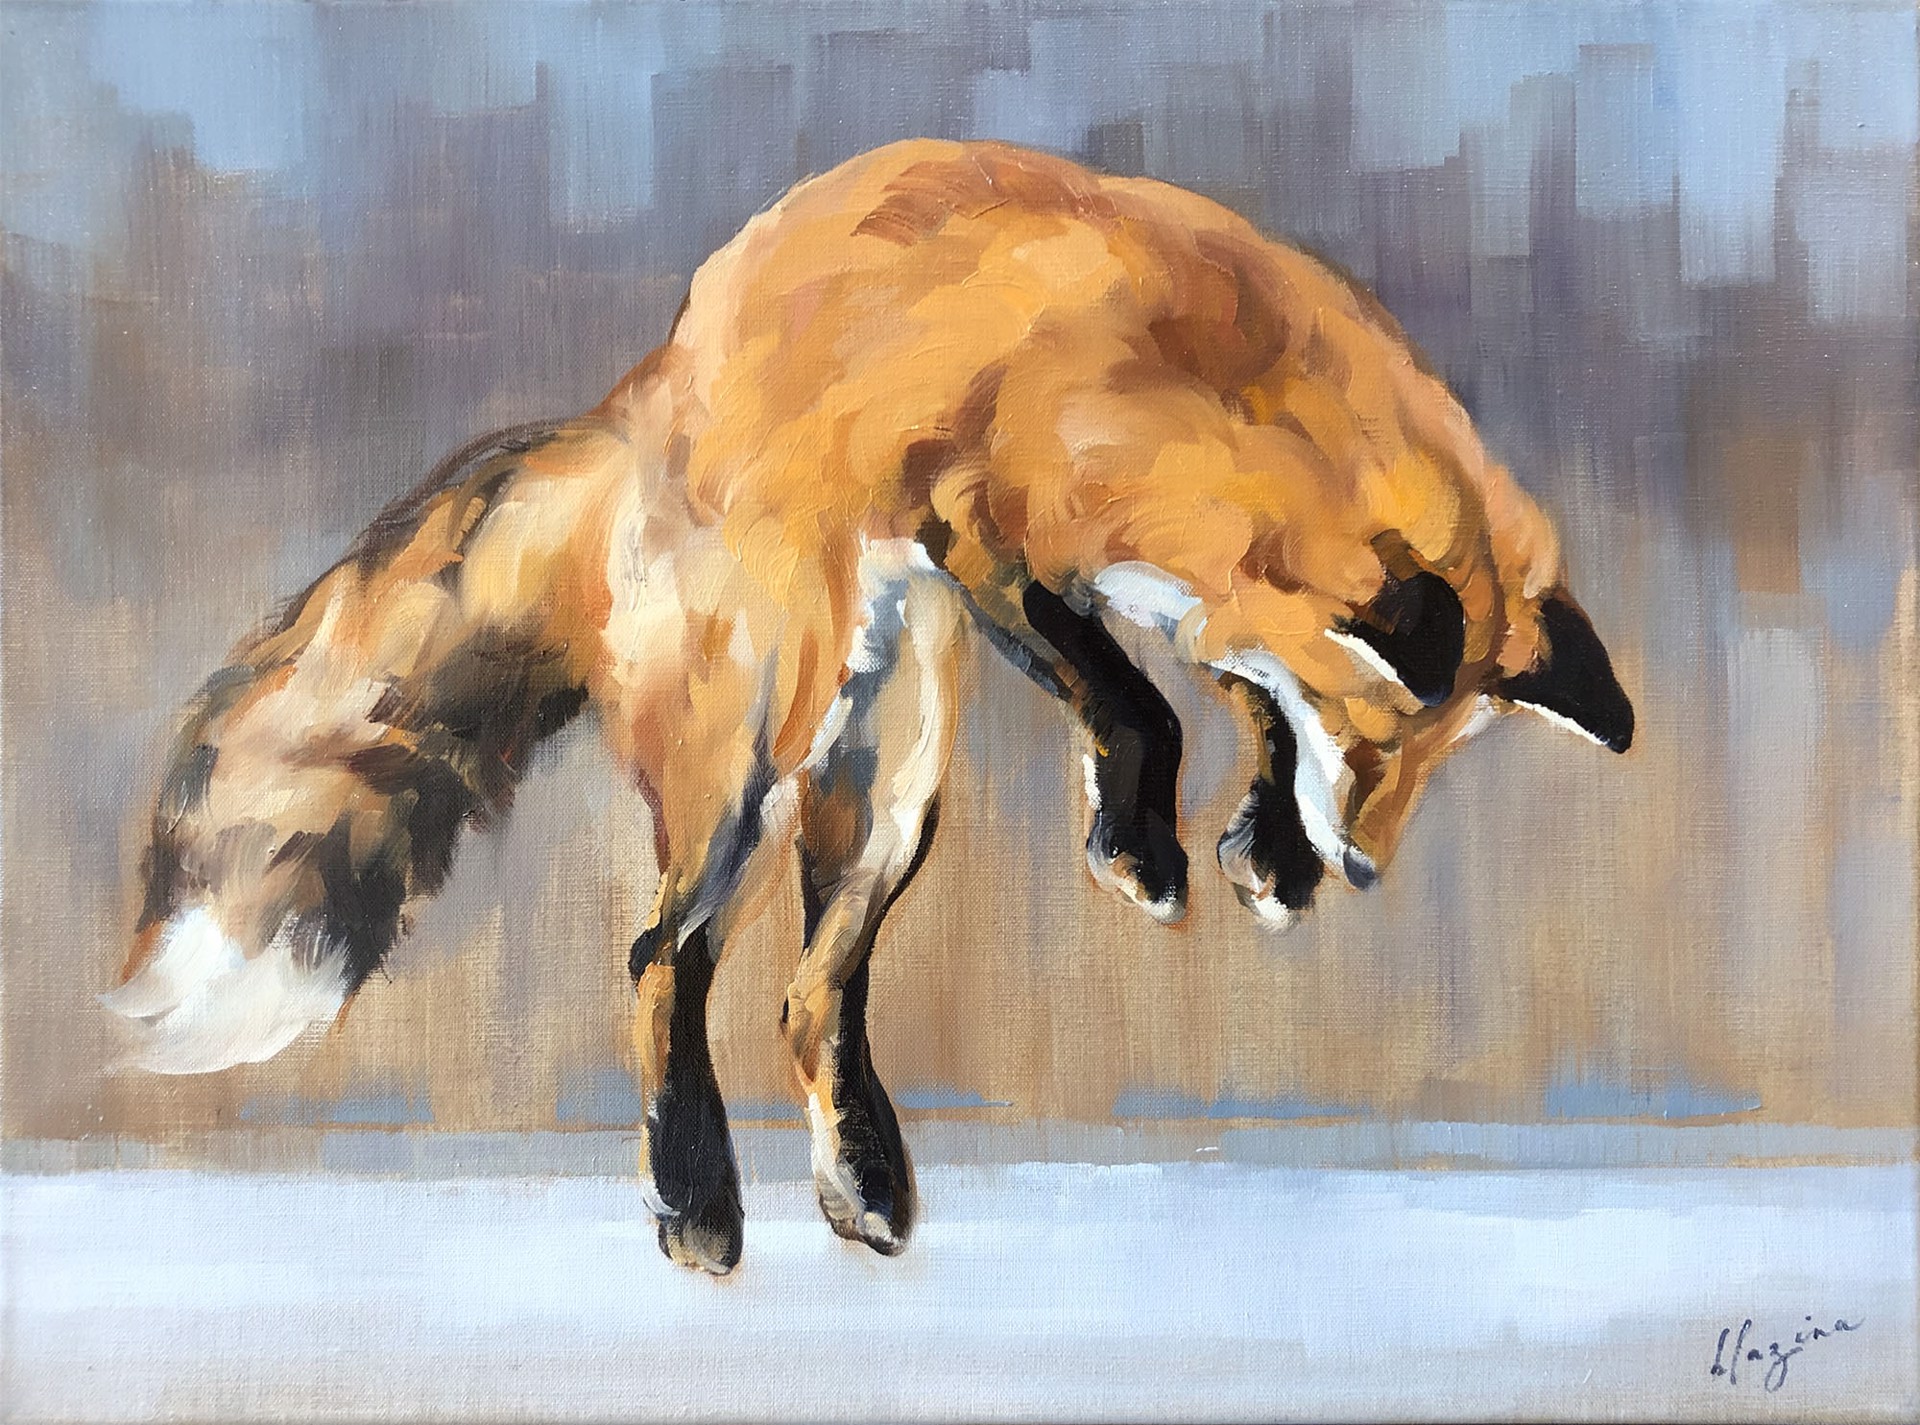 A Contemporary Oil Painting Of A Fox Pouning In The Snow By Amber Blazina At Gallery Wild